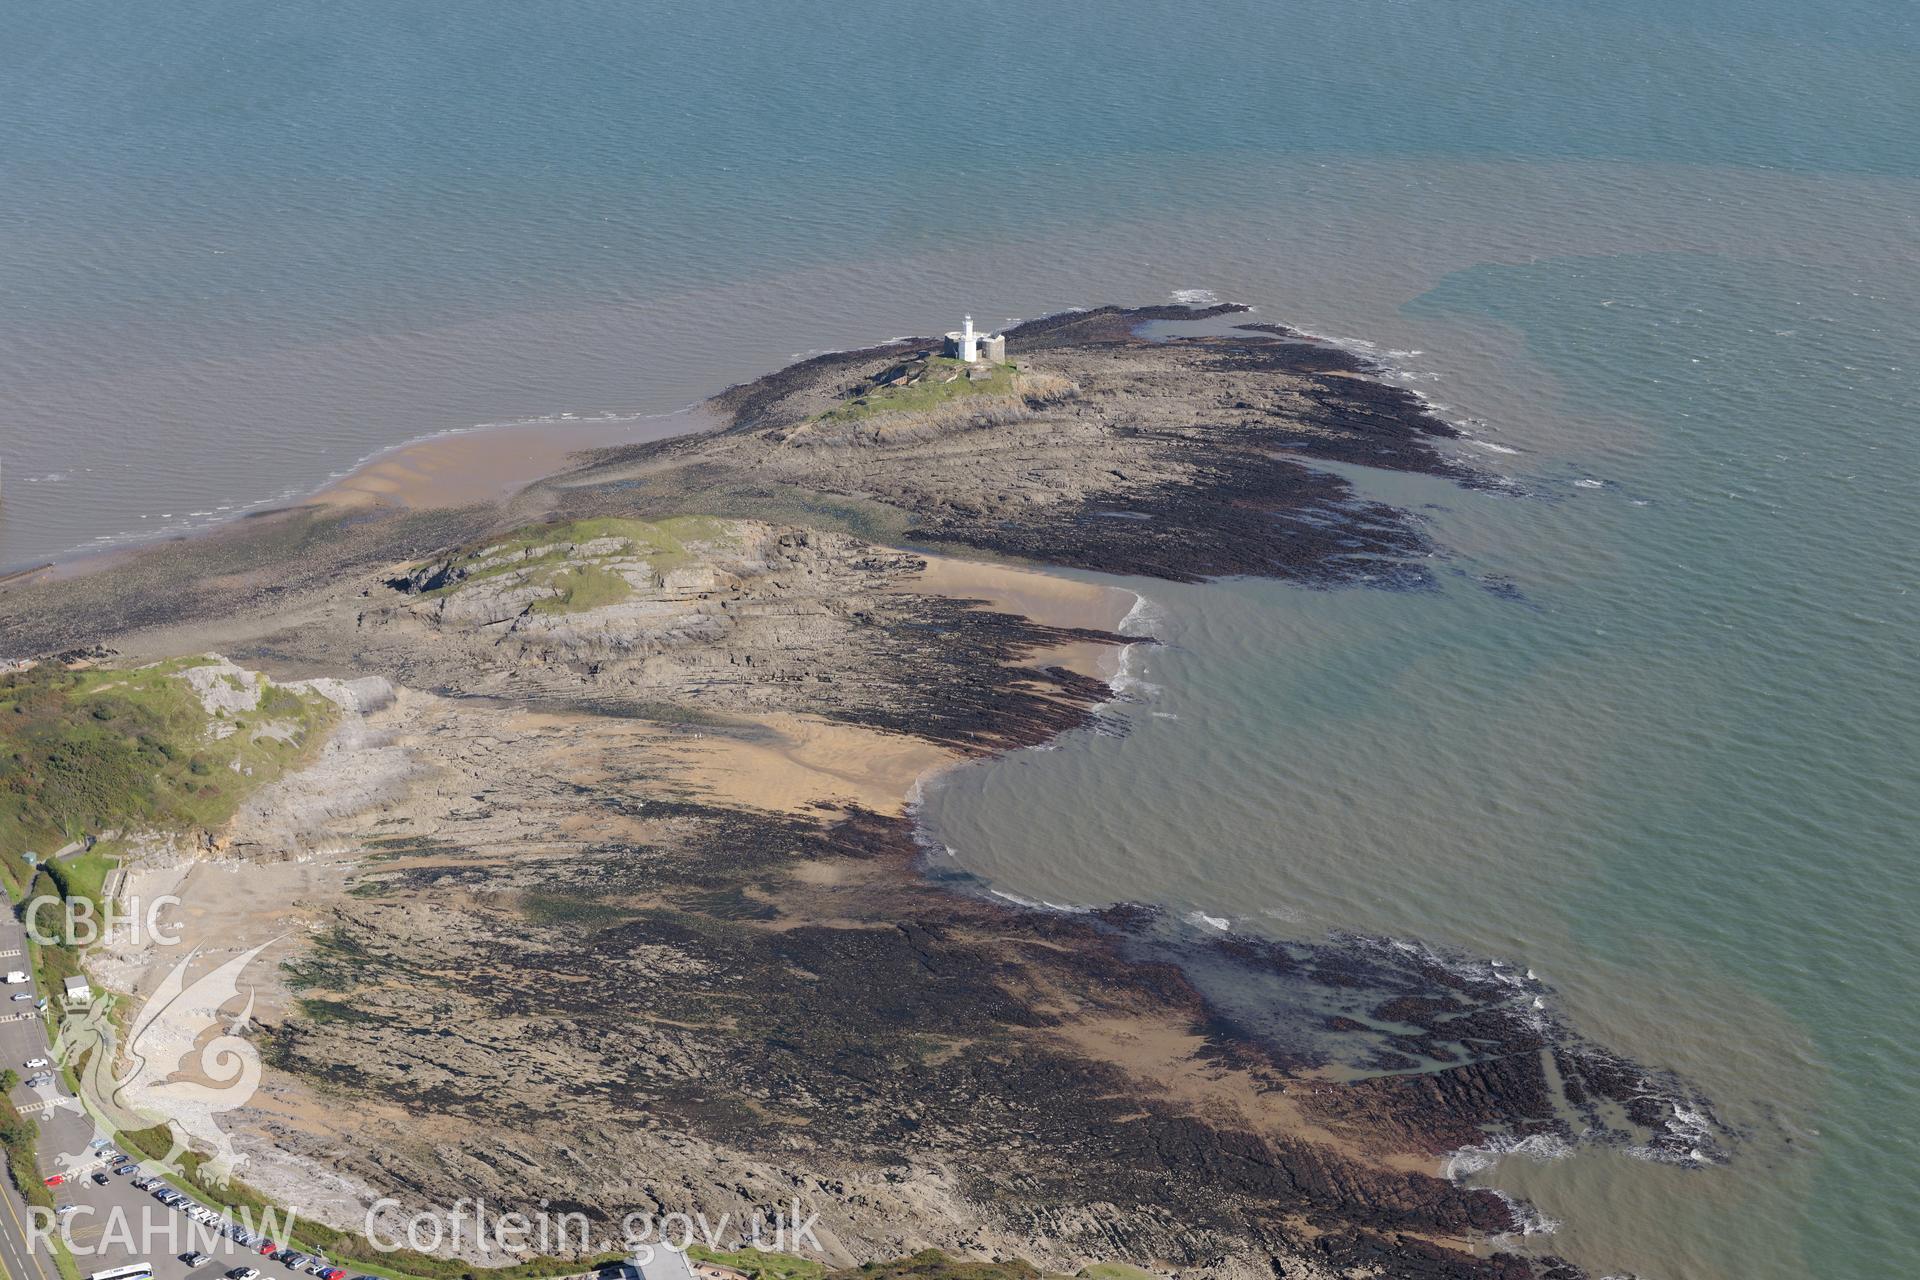 Mumbles fort and Mumbles lighthouse at the south western edge of Swansea Bay. Oblique aerial photograph taken during the Royal Commission's programme of archaeological aerial reconnaissance by Toby Driver on 30th September 2015.